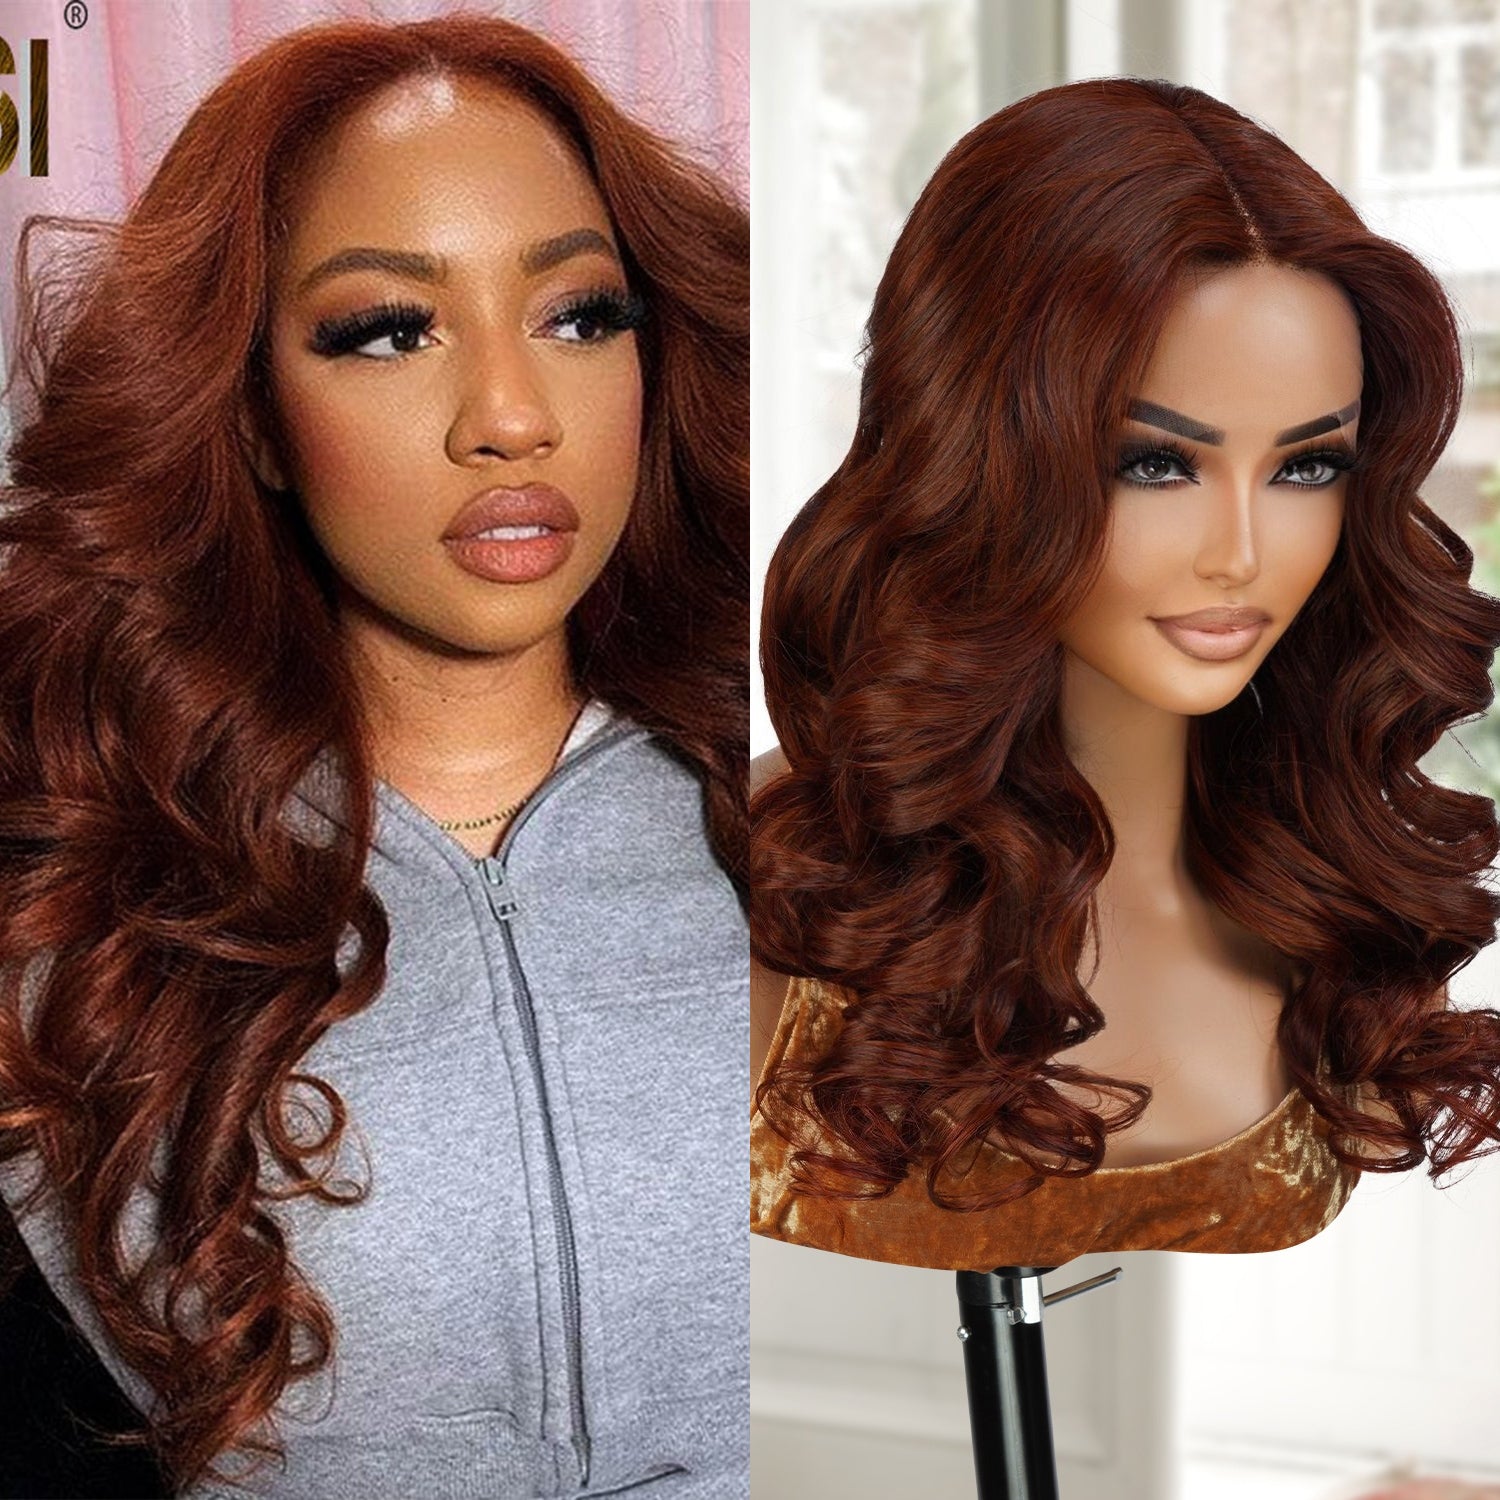 This wig is wearable right out the box so you don’t need to know a lot about wig styling to wear the T part, It is a salon-quality that doesn't require any further steps. Just wear and go, Natural Looking, Soft, Heathly, Tangle Free & No Shedding, Low maintenance hair style, Pre-colored in Copper brown by expert.